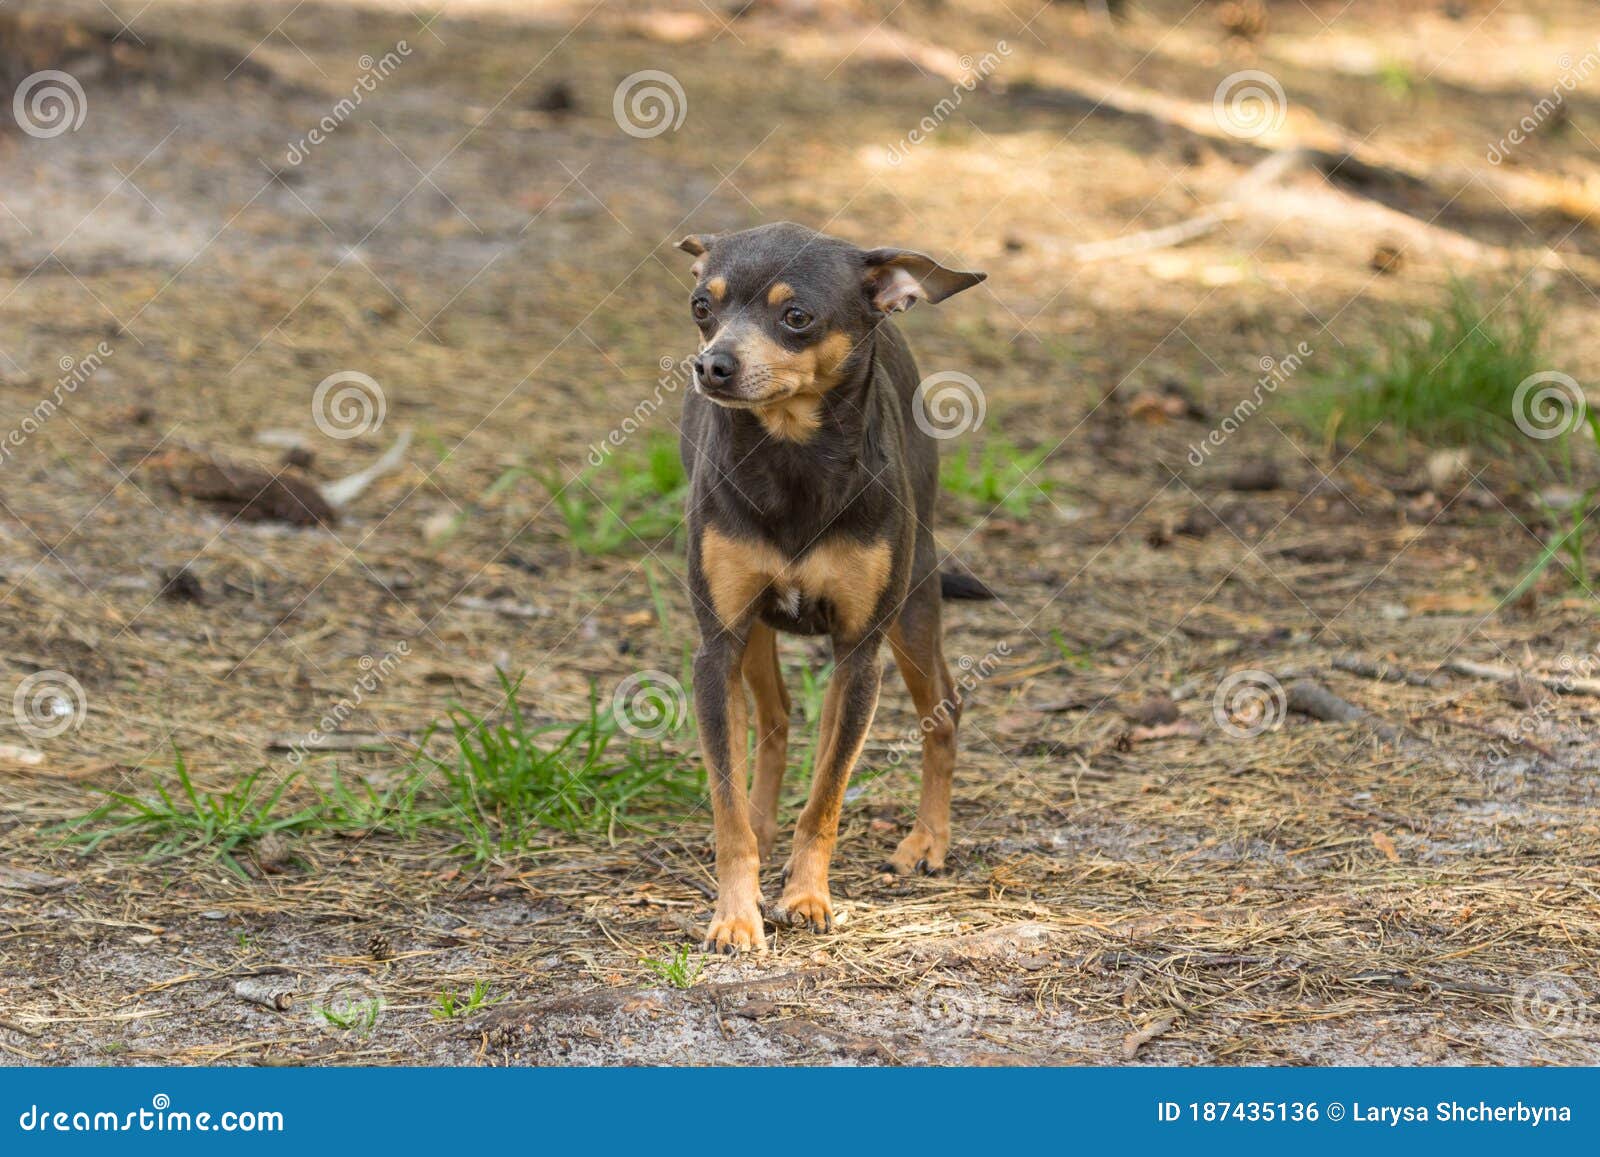 Little Dog Chihuahua with Doberman Color Stock Photo - Image of ...